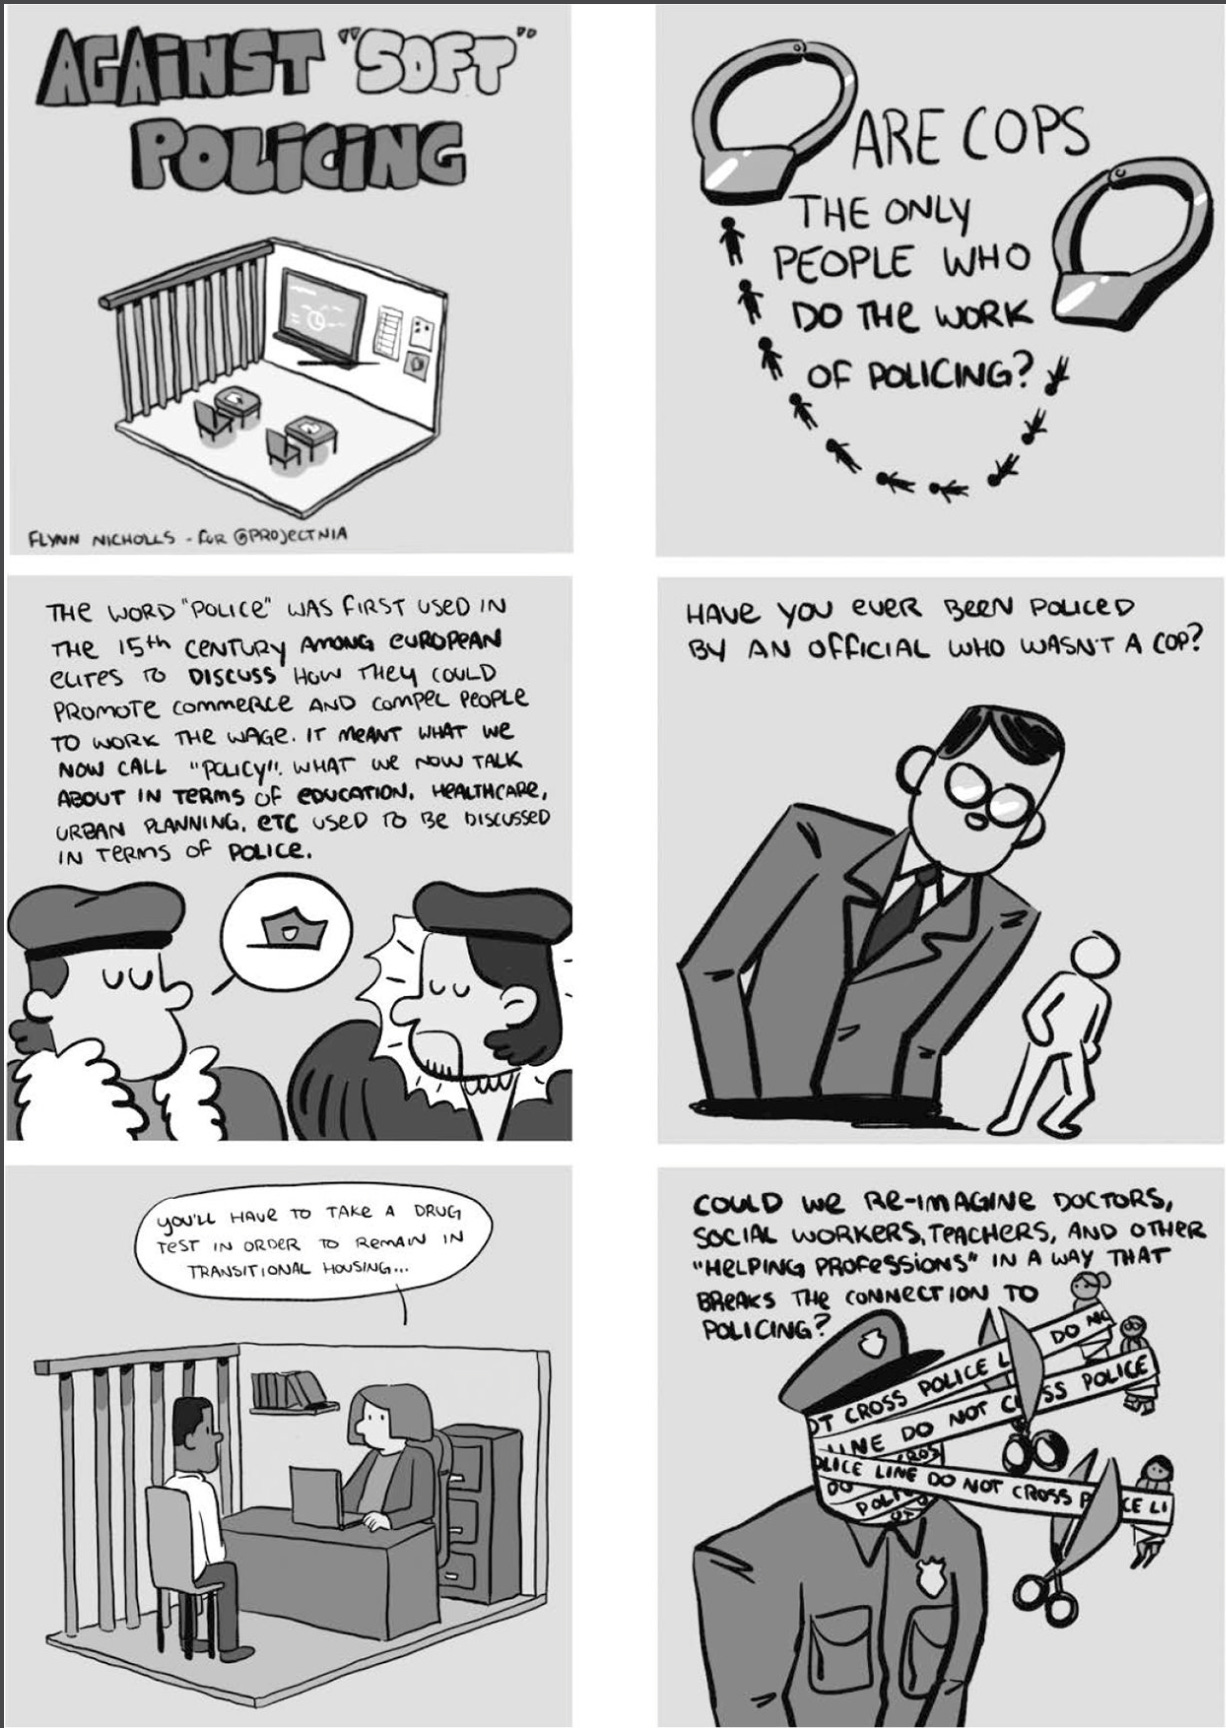 Comic found in the book “No More Police!” with the thesis that administrative efforts also do the work of policing. This is evidenced by the history and origins of the word police (related to policy formation in the 15th century) and the question: have you ever been policed by an official who was not a cop?